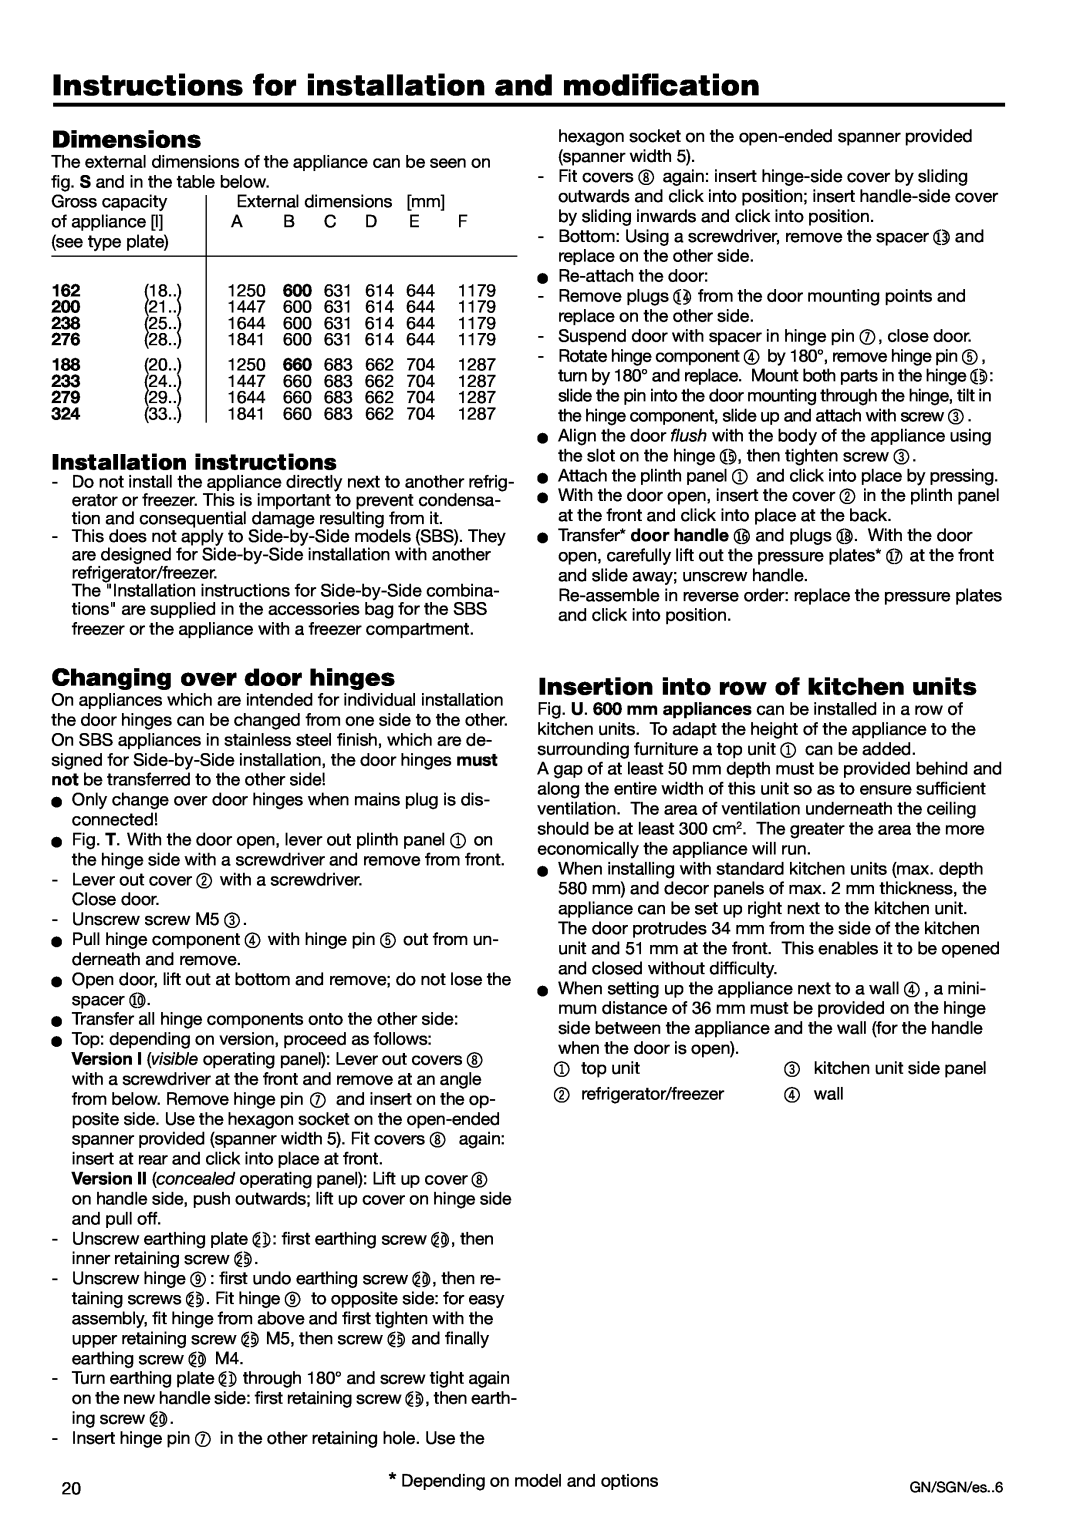 Liebherr 7082 300-03 manual Instructions for installation and modiﬁcation, Dimensions, Changing over door hinges 